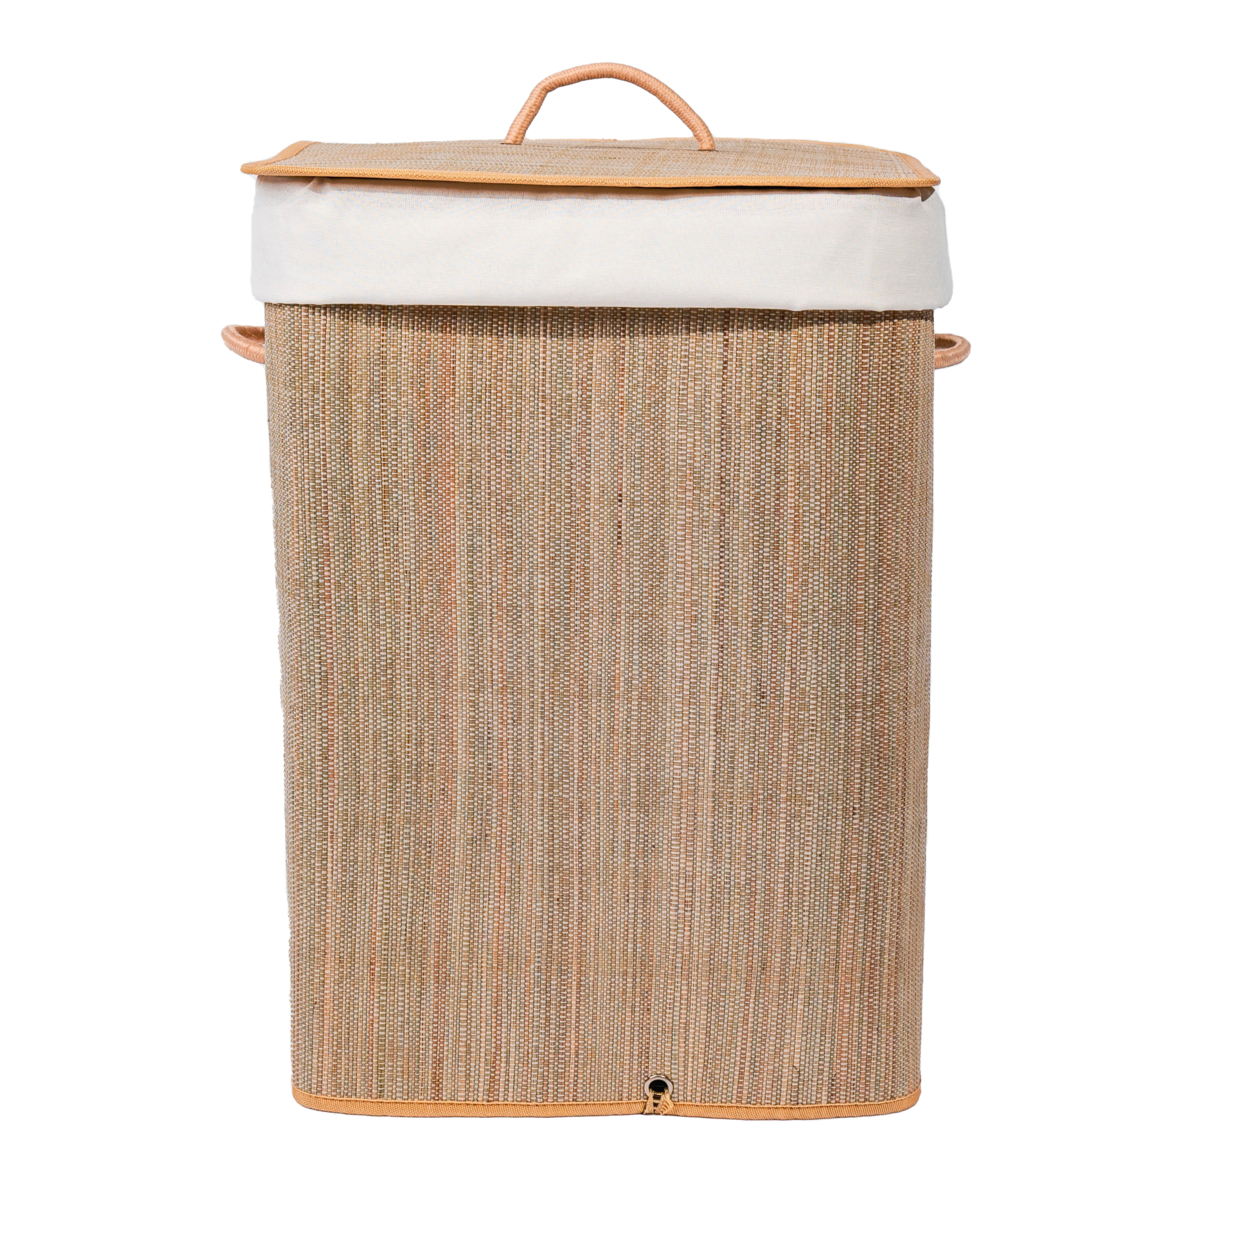 Foldable Laundry Hamper With Lid And Handles For Easy Carrying - Mendong Rectangle